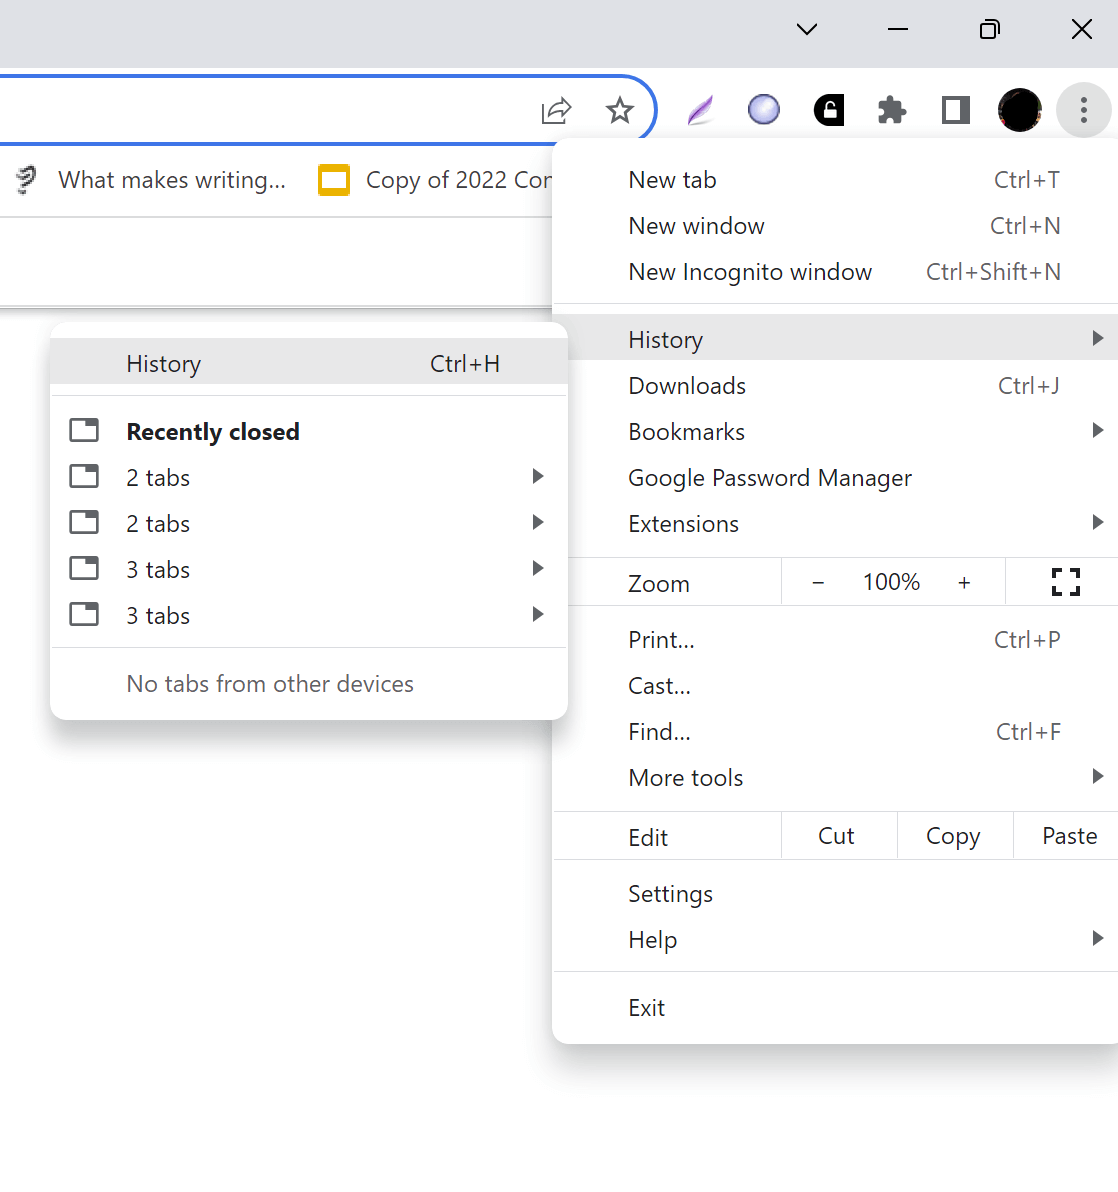 History option from a drop down menu in Chrome